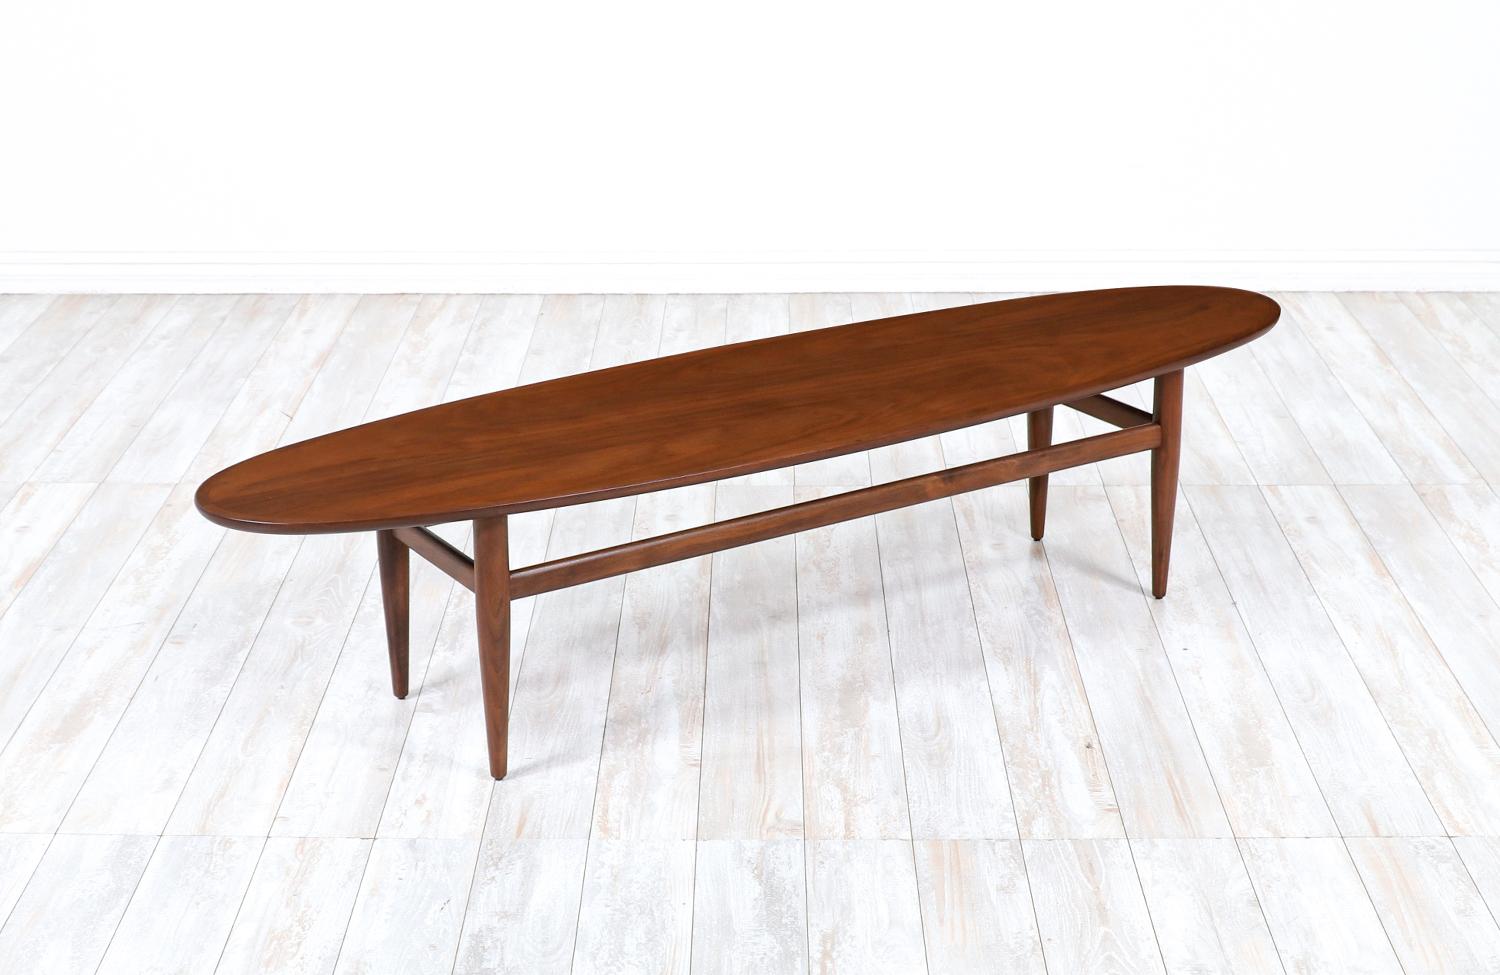 Mid-Century Modern Surfboard Style coffee table by Henredon.

________________________________________

Transforming a piece of Mid-Century Modern furniture is like bringing history back to life, and we take this journey with passion and precision.